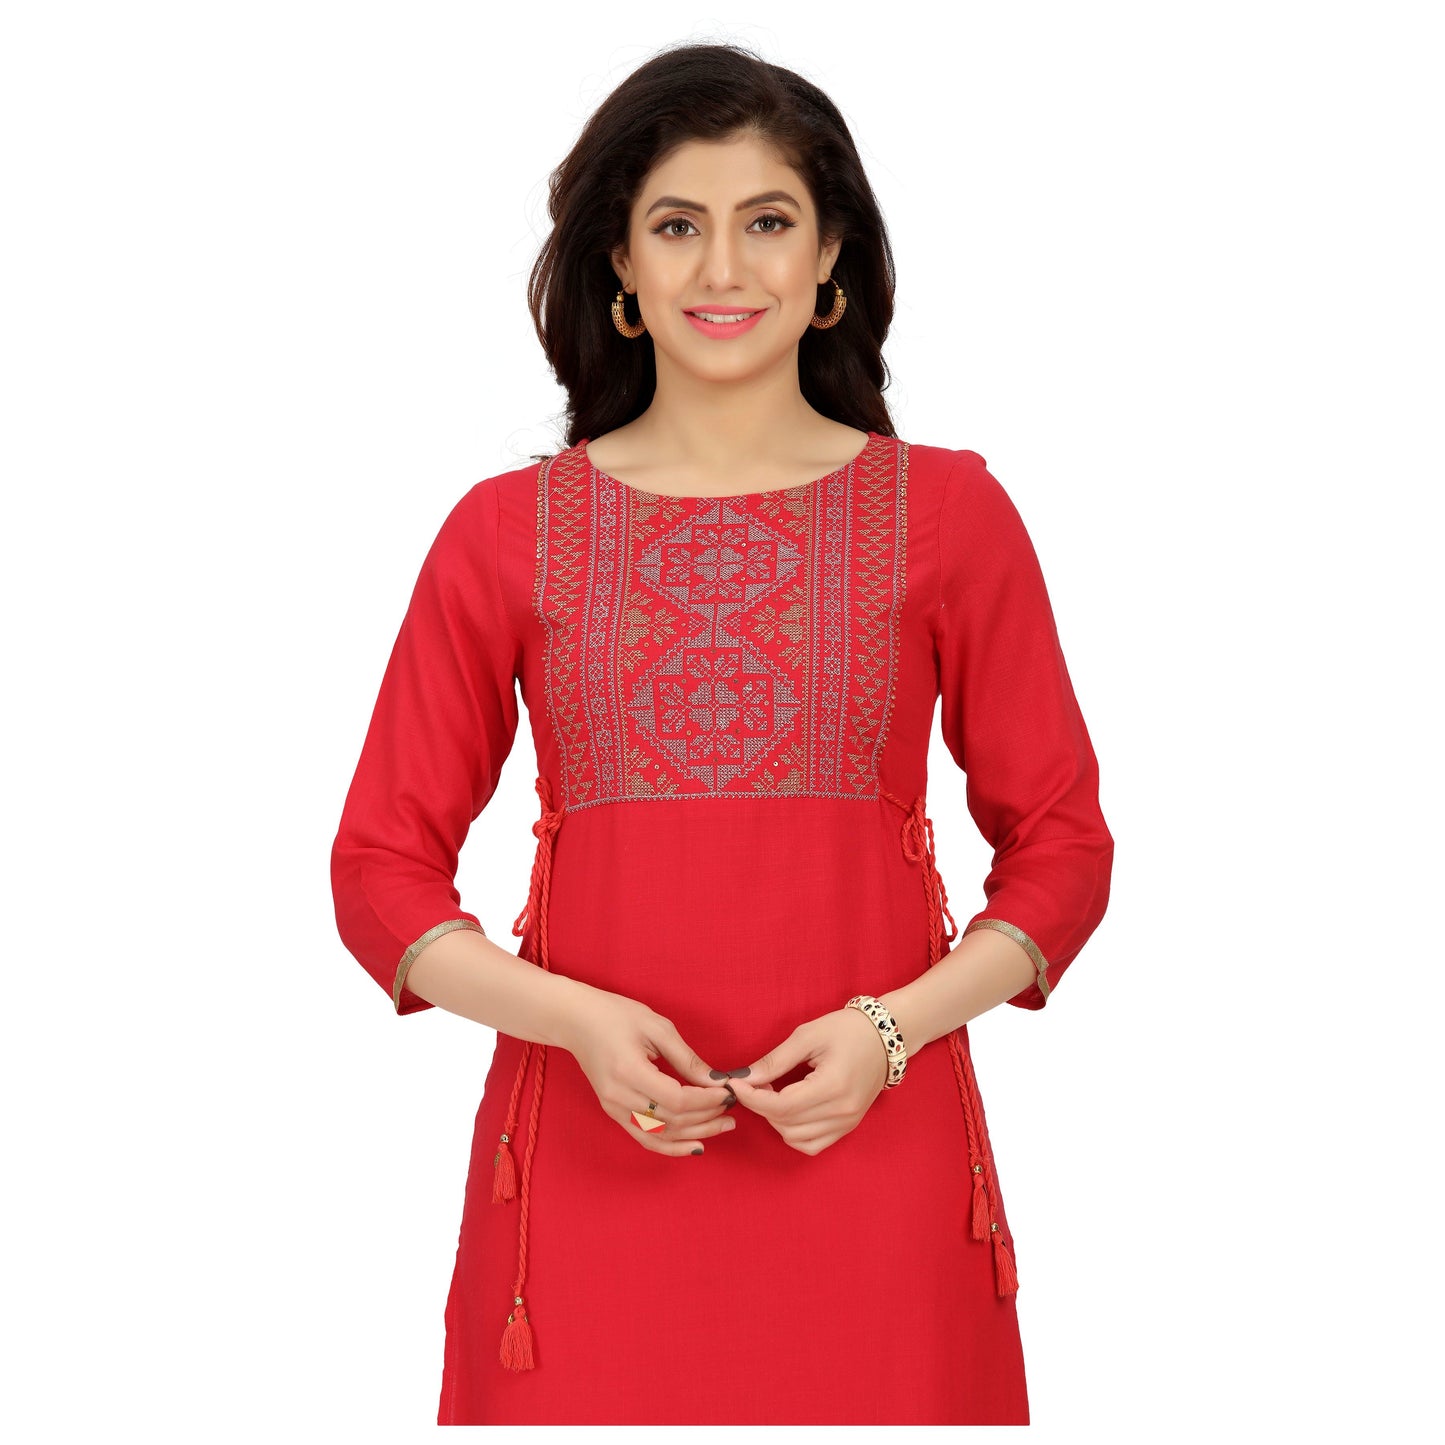 Cute Indian Kurti for women. Kurti features a printed neck line and dori strings on the side. The length is 3/4th and ideal to wear on jeans. Pink Tunic top for women.